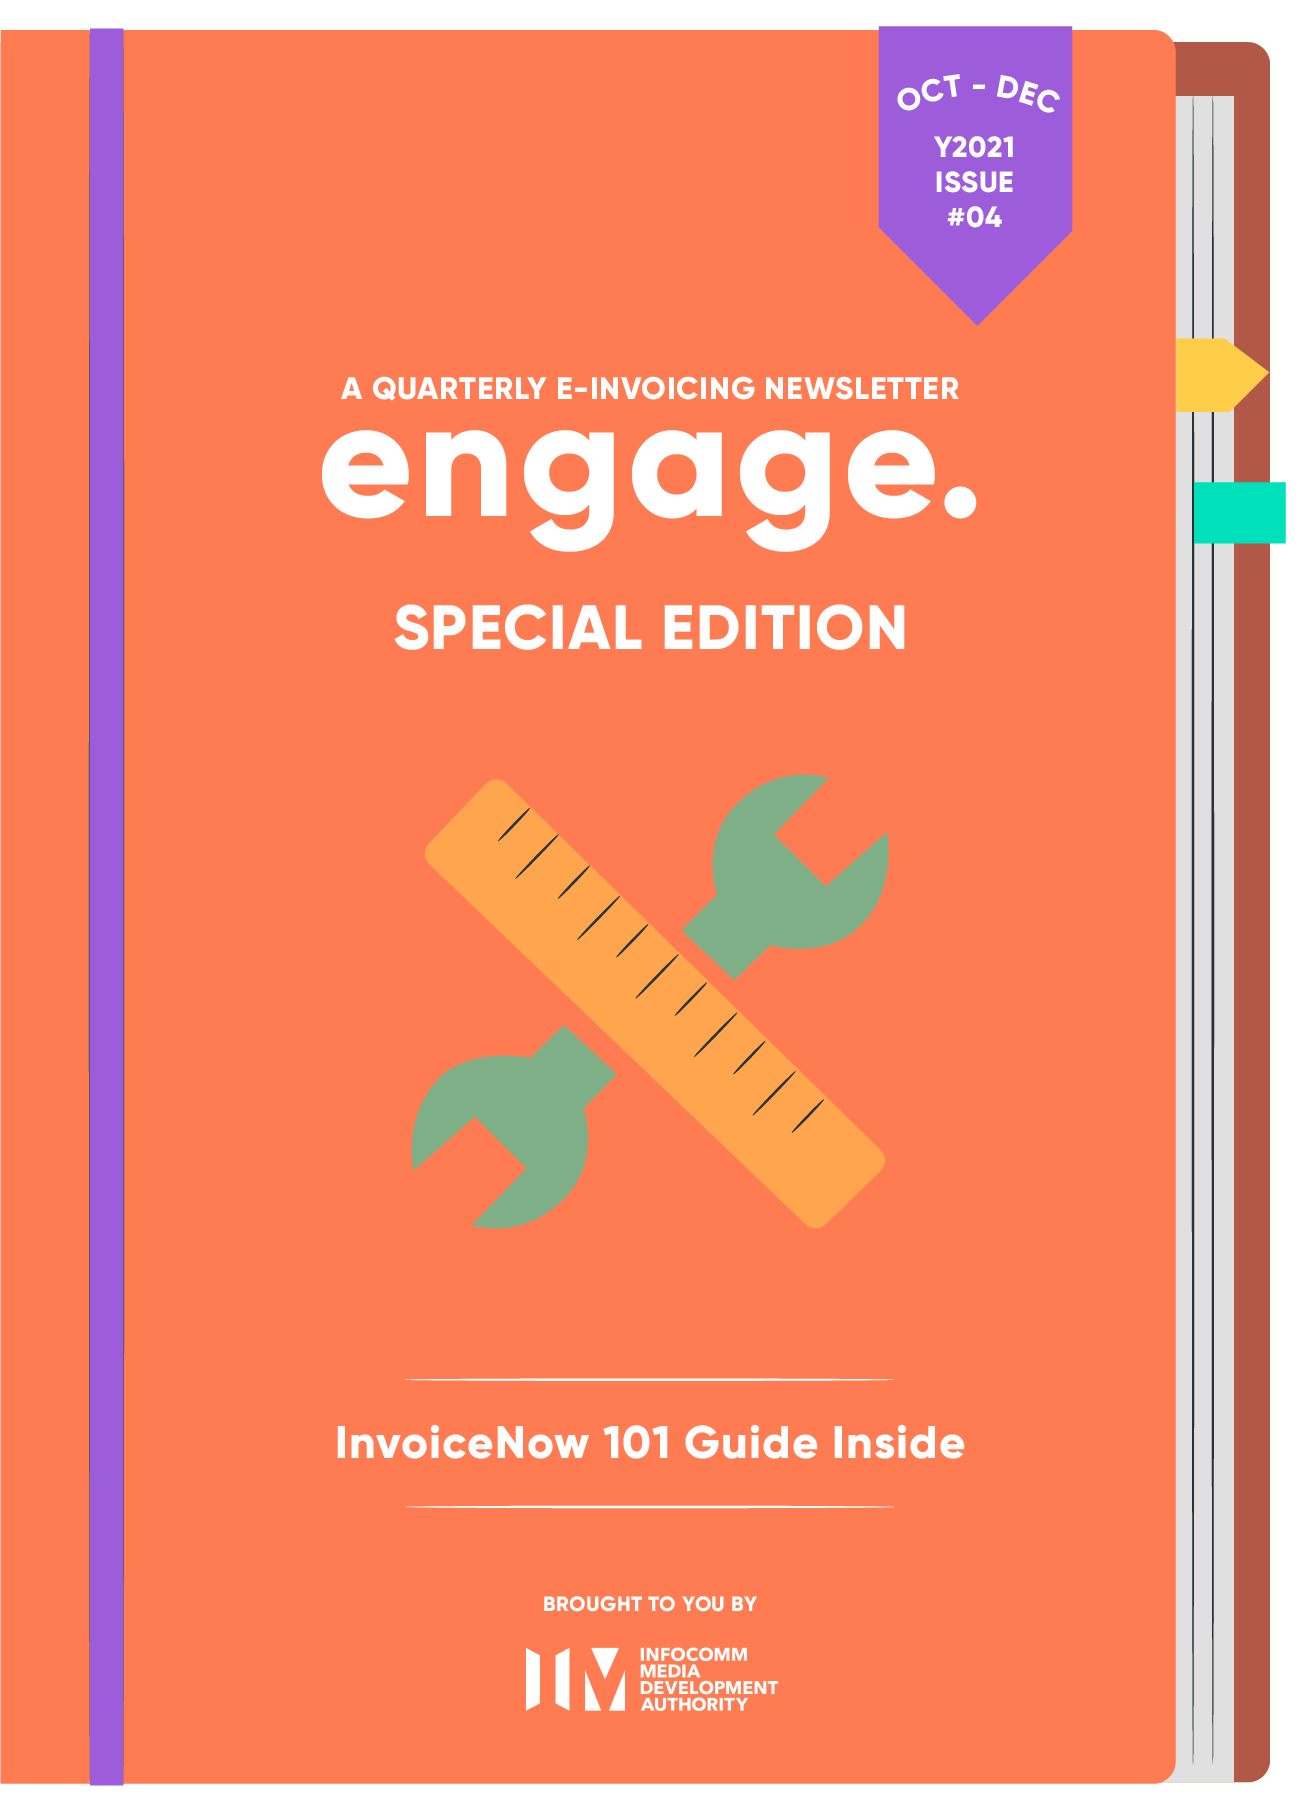 ENGAGE – A Quarterly E-Invoicing Newsletter by IMDA: Y2021 ISSUE #04